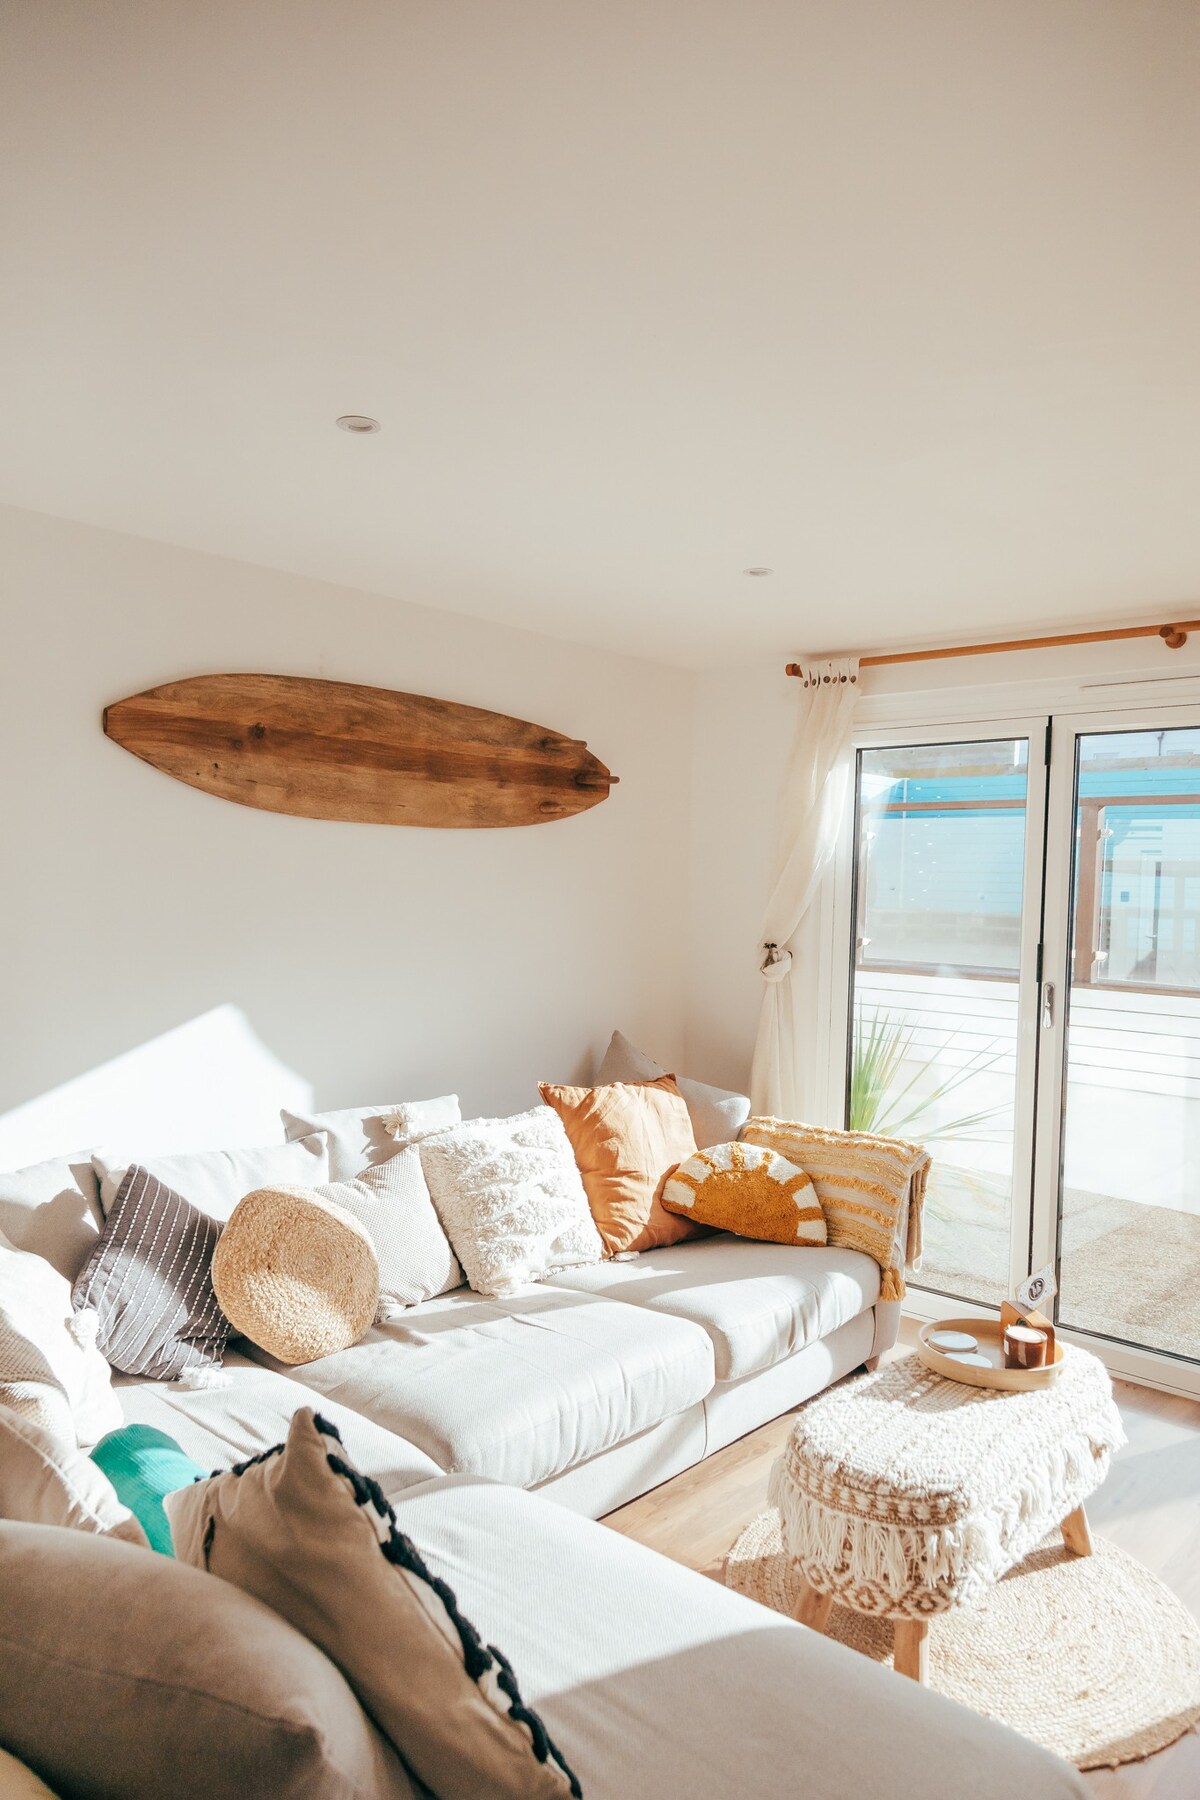 The Hideout - Newquay - Fully Stocked Eco Escape